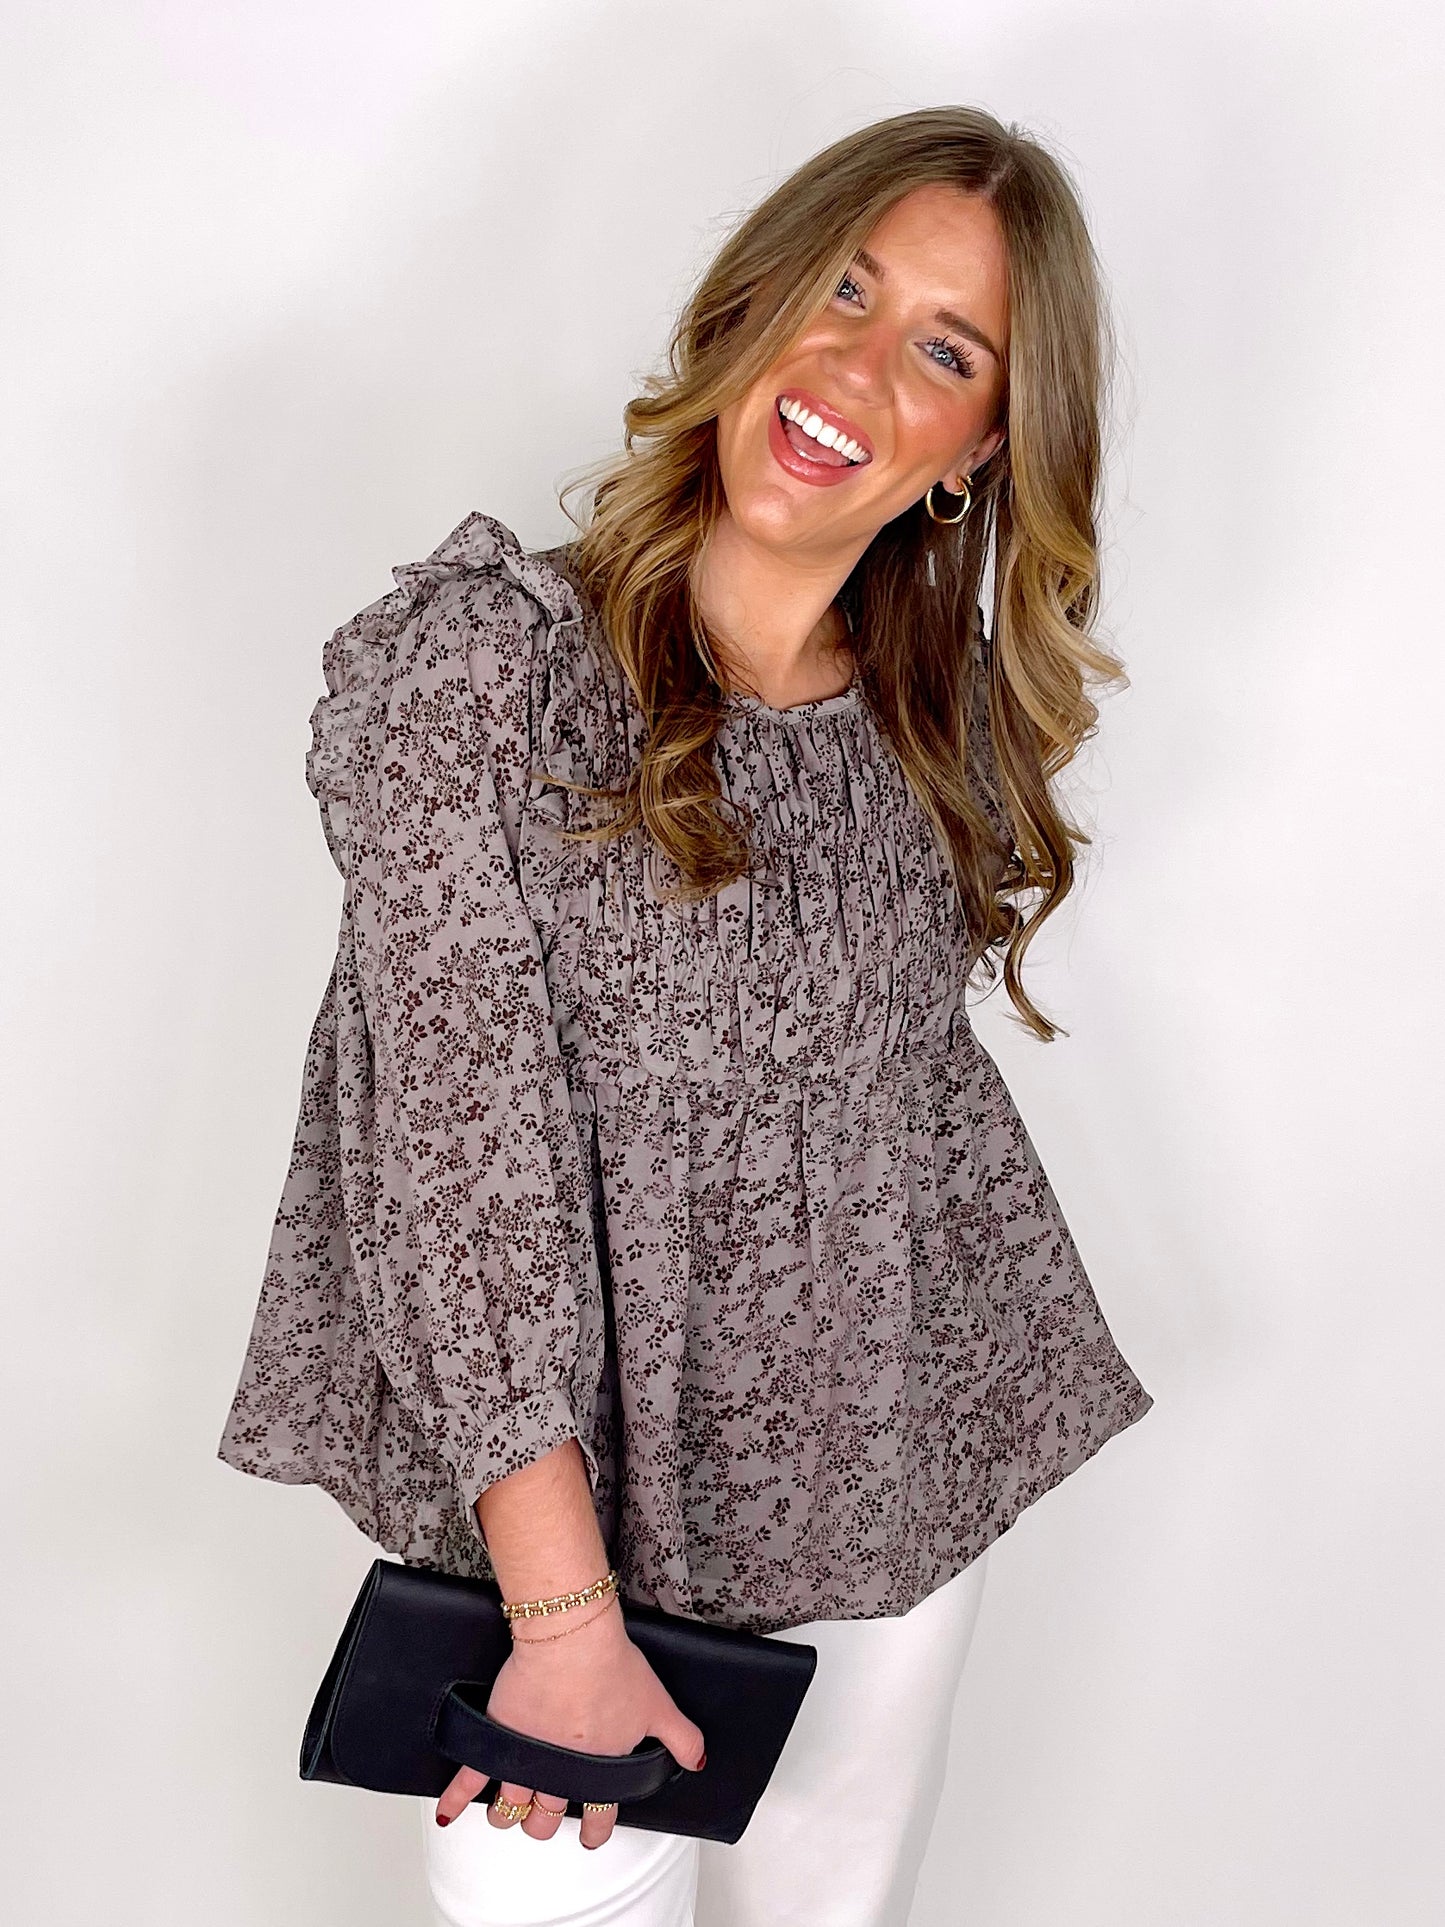 The Abigail Top-Blouse-&merci-The Village Shoppe, Women’s Fashion Boutique, Shop Online and In Store - Located in Muscle Shoals, AL.